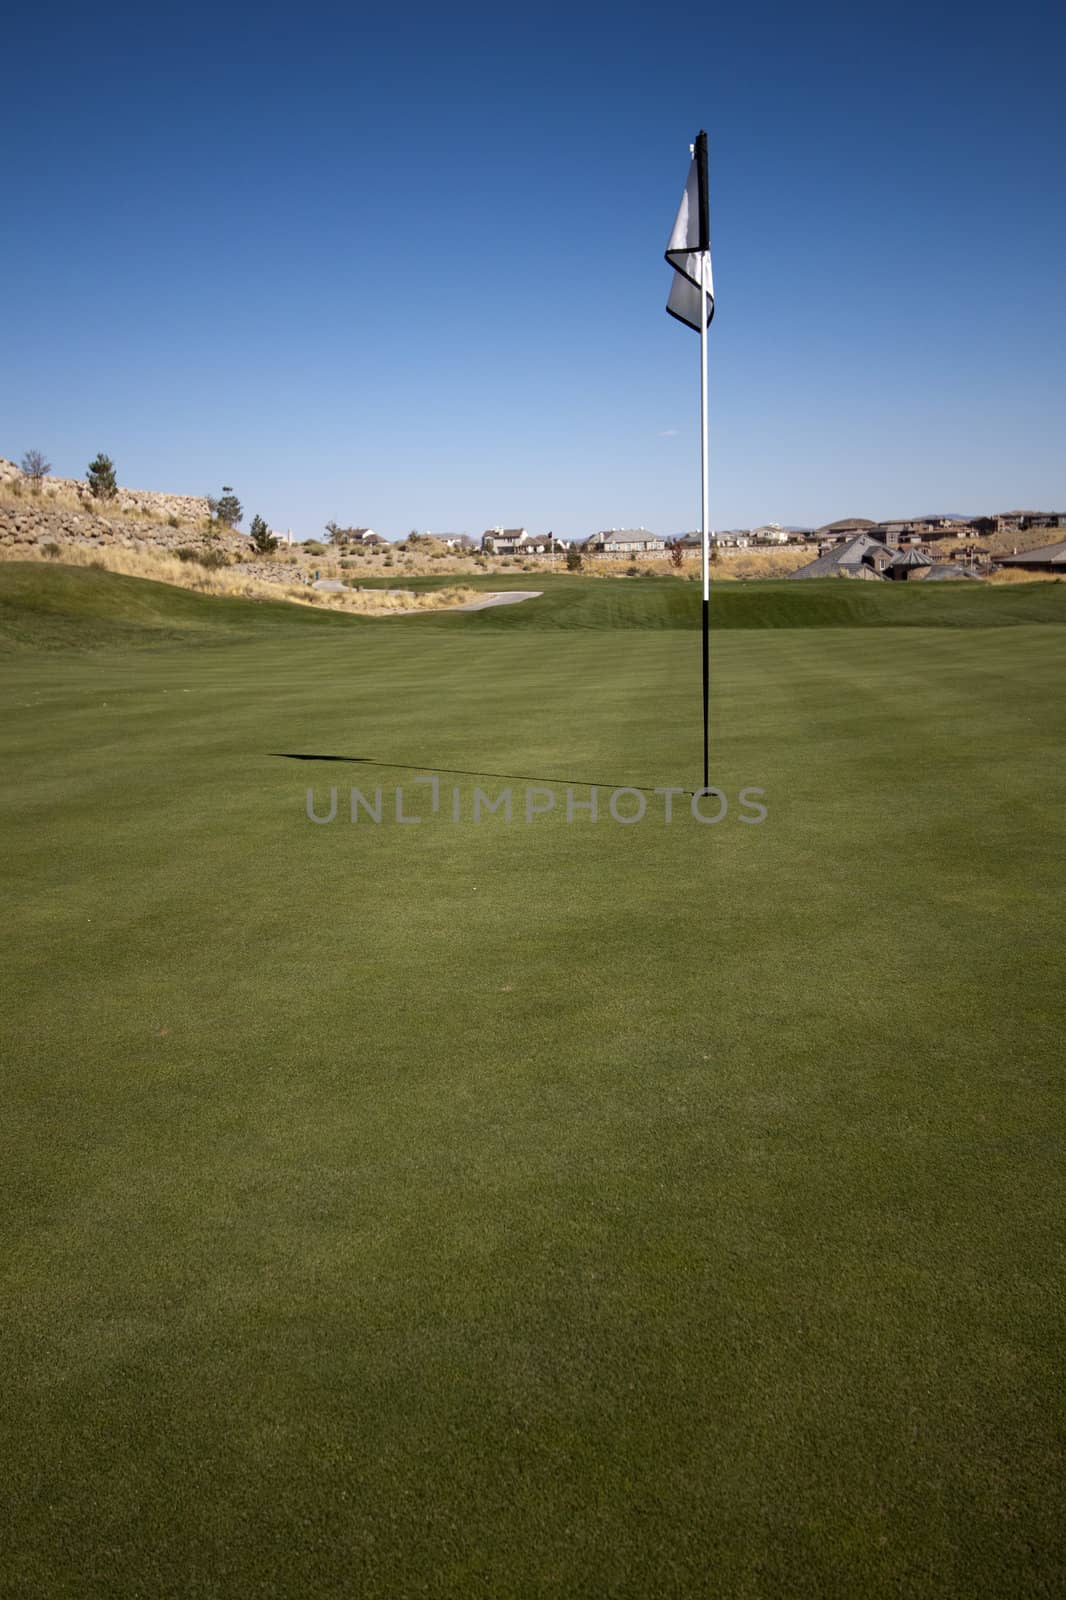 Golf course with green grass and clear blue skies. by jeremywhat